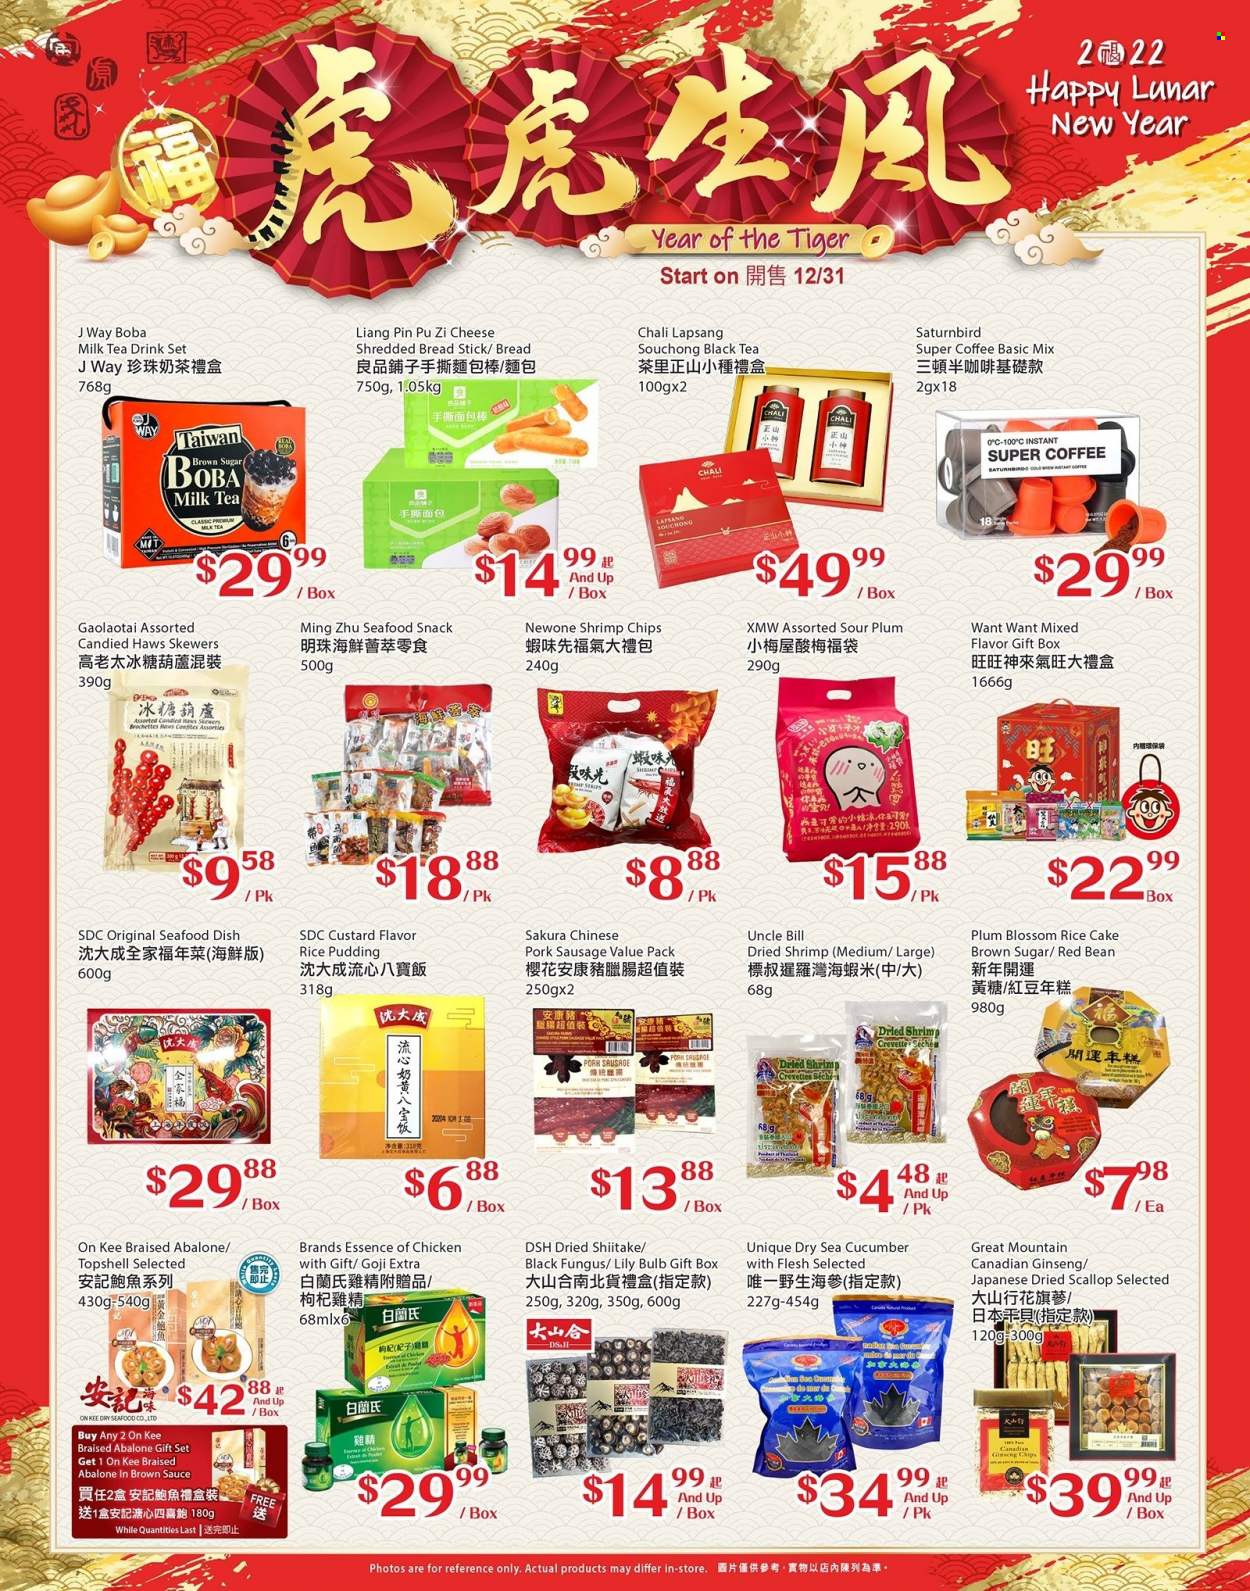 thumbnail - T&T Supermarket Flyer - Sales products - bread, scallops, seafood, shrimps, sauce, sausage, pork sausage, cheese, custard, rice pudding, milk, Blossom, strips, gift set, snack, cane sugar, brown sauce, tea, coffee, pin, gift box, bulb, ginseng, Essence of Chicken, chips. Page 1.